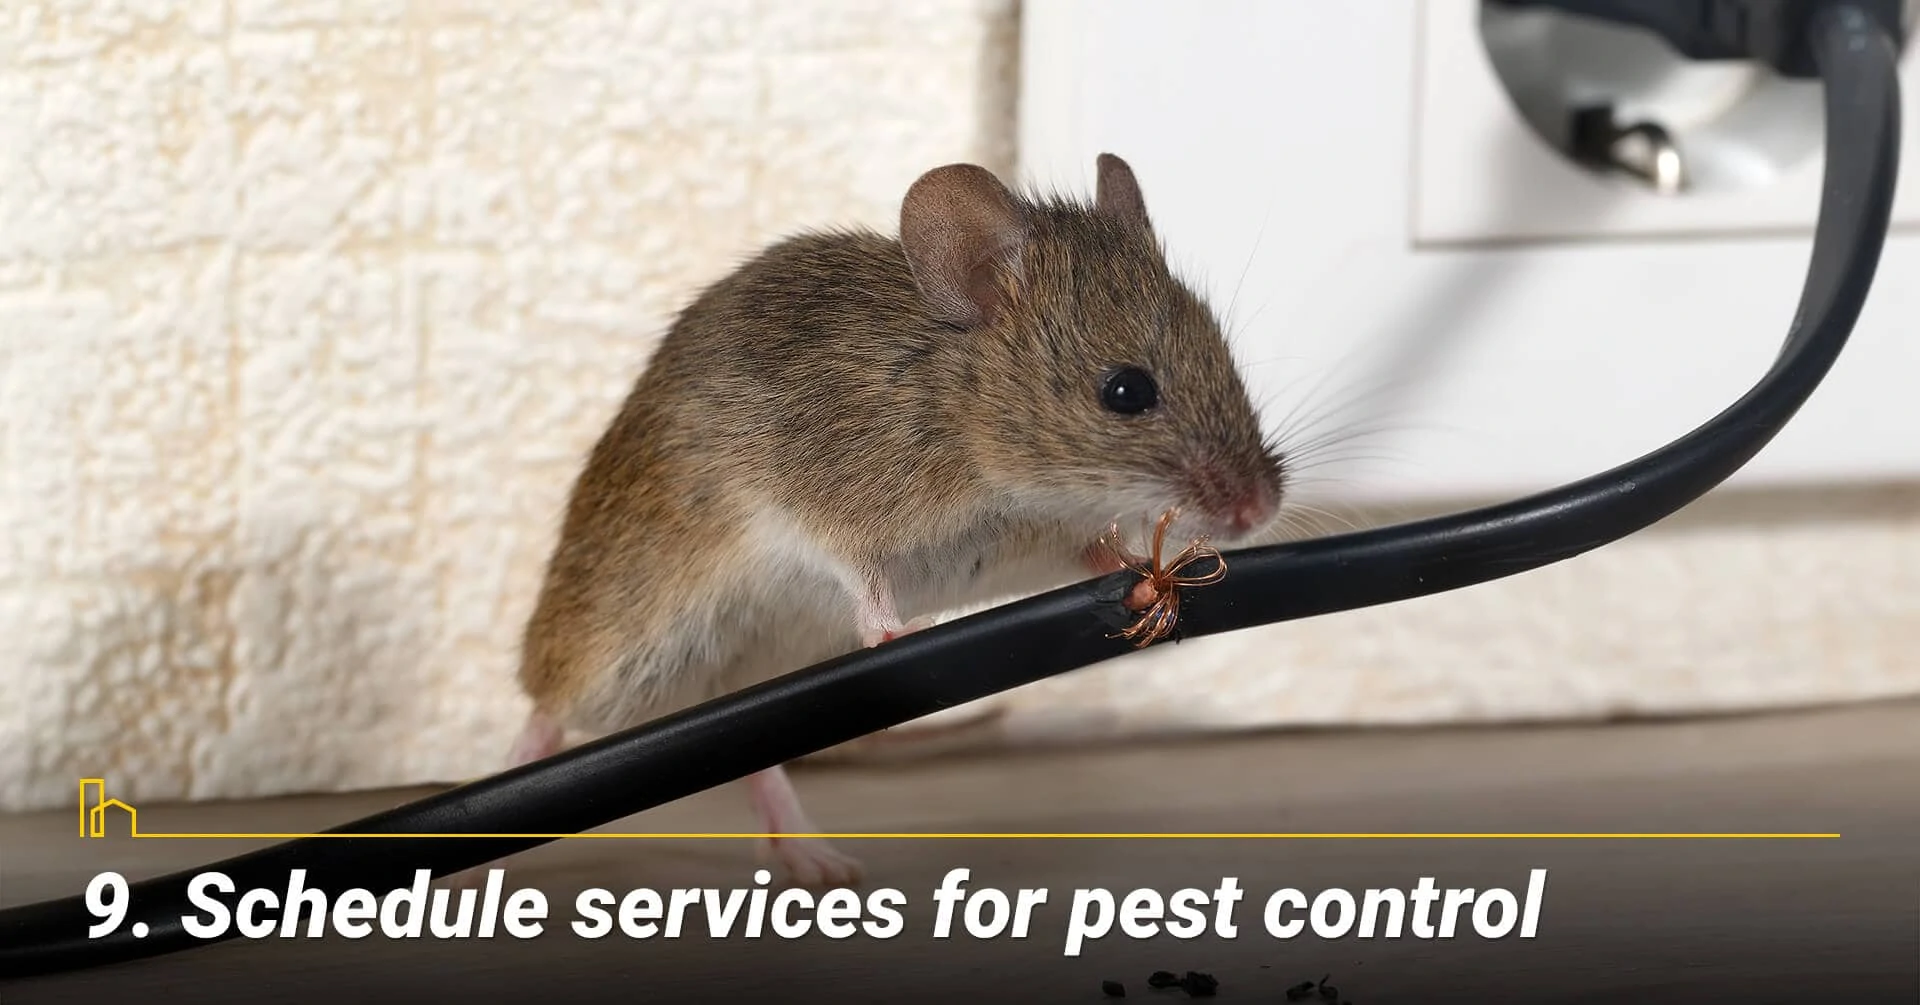 Schedule services for pest control, keep the pest away